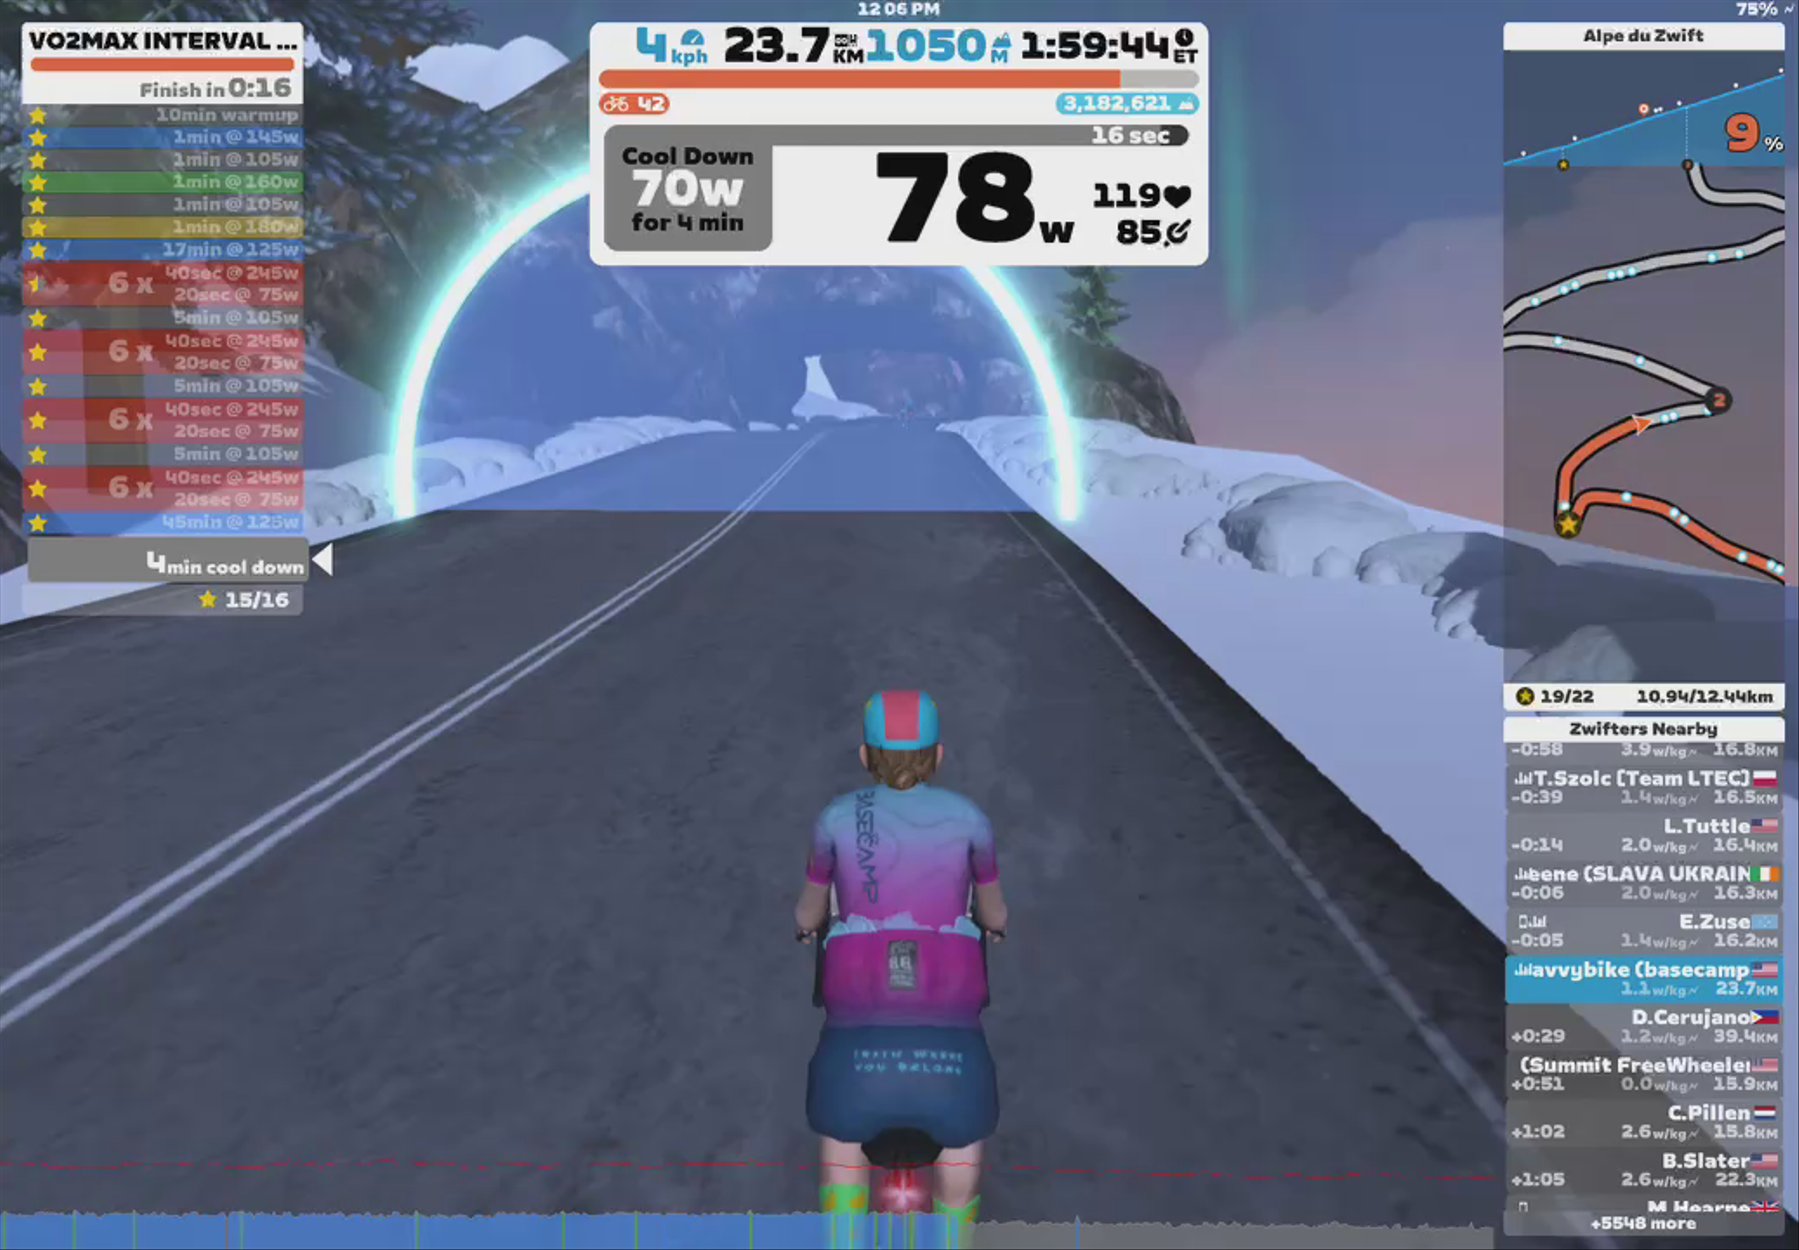 Zwift - VO2MAX INTERVAL | 40/20 MICRO on Tour of Fire and Ice in Watopia